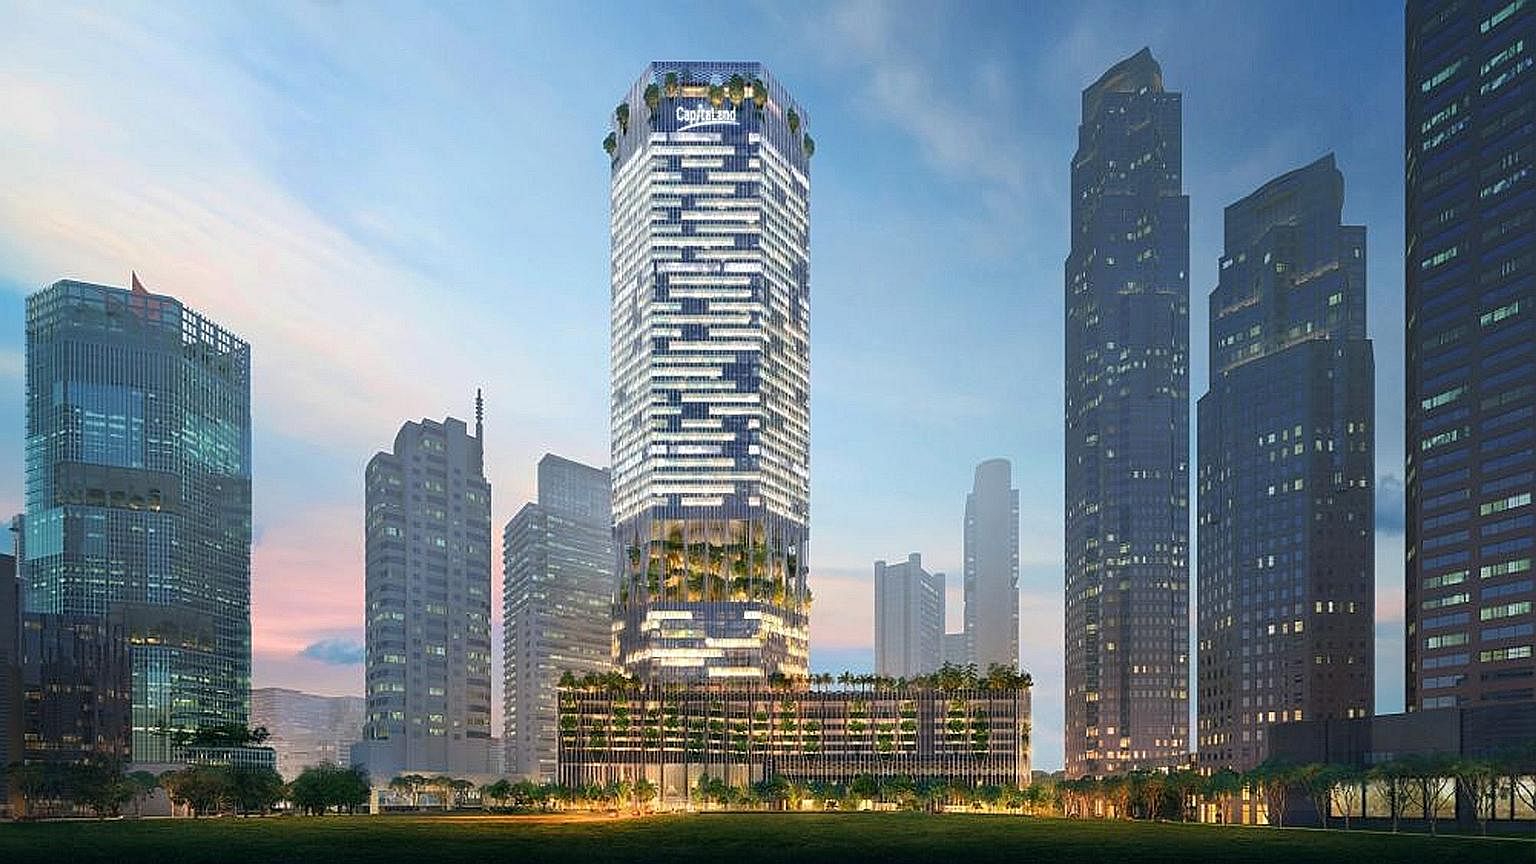 American architect Brian Yang is the Bjarke Ingels Group partner in charge of the 51-storey CapitaSpring (artist's impression, left), which is set to be one of the tallest - and greenest - buildings in Raffles Place.